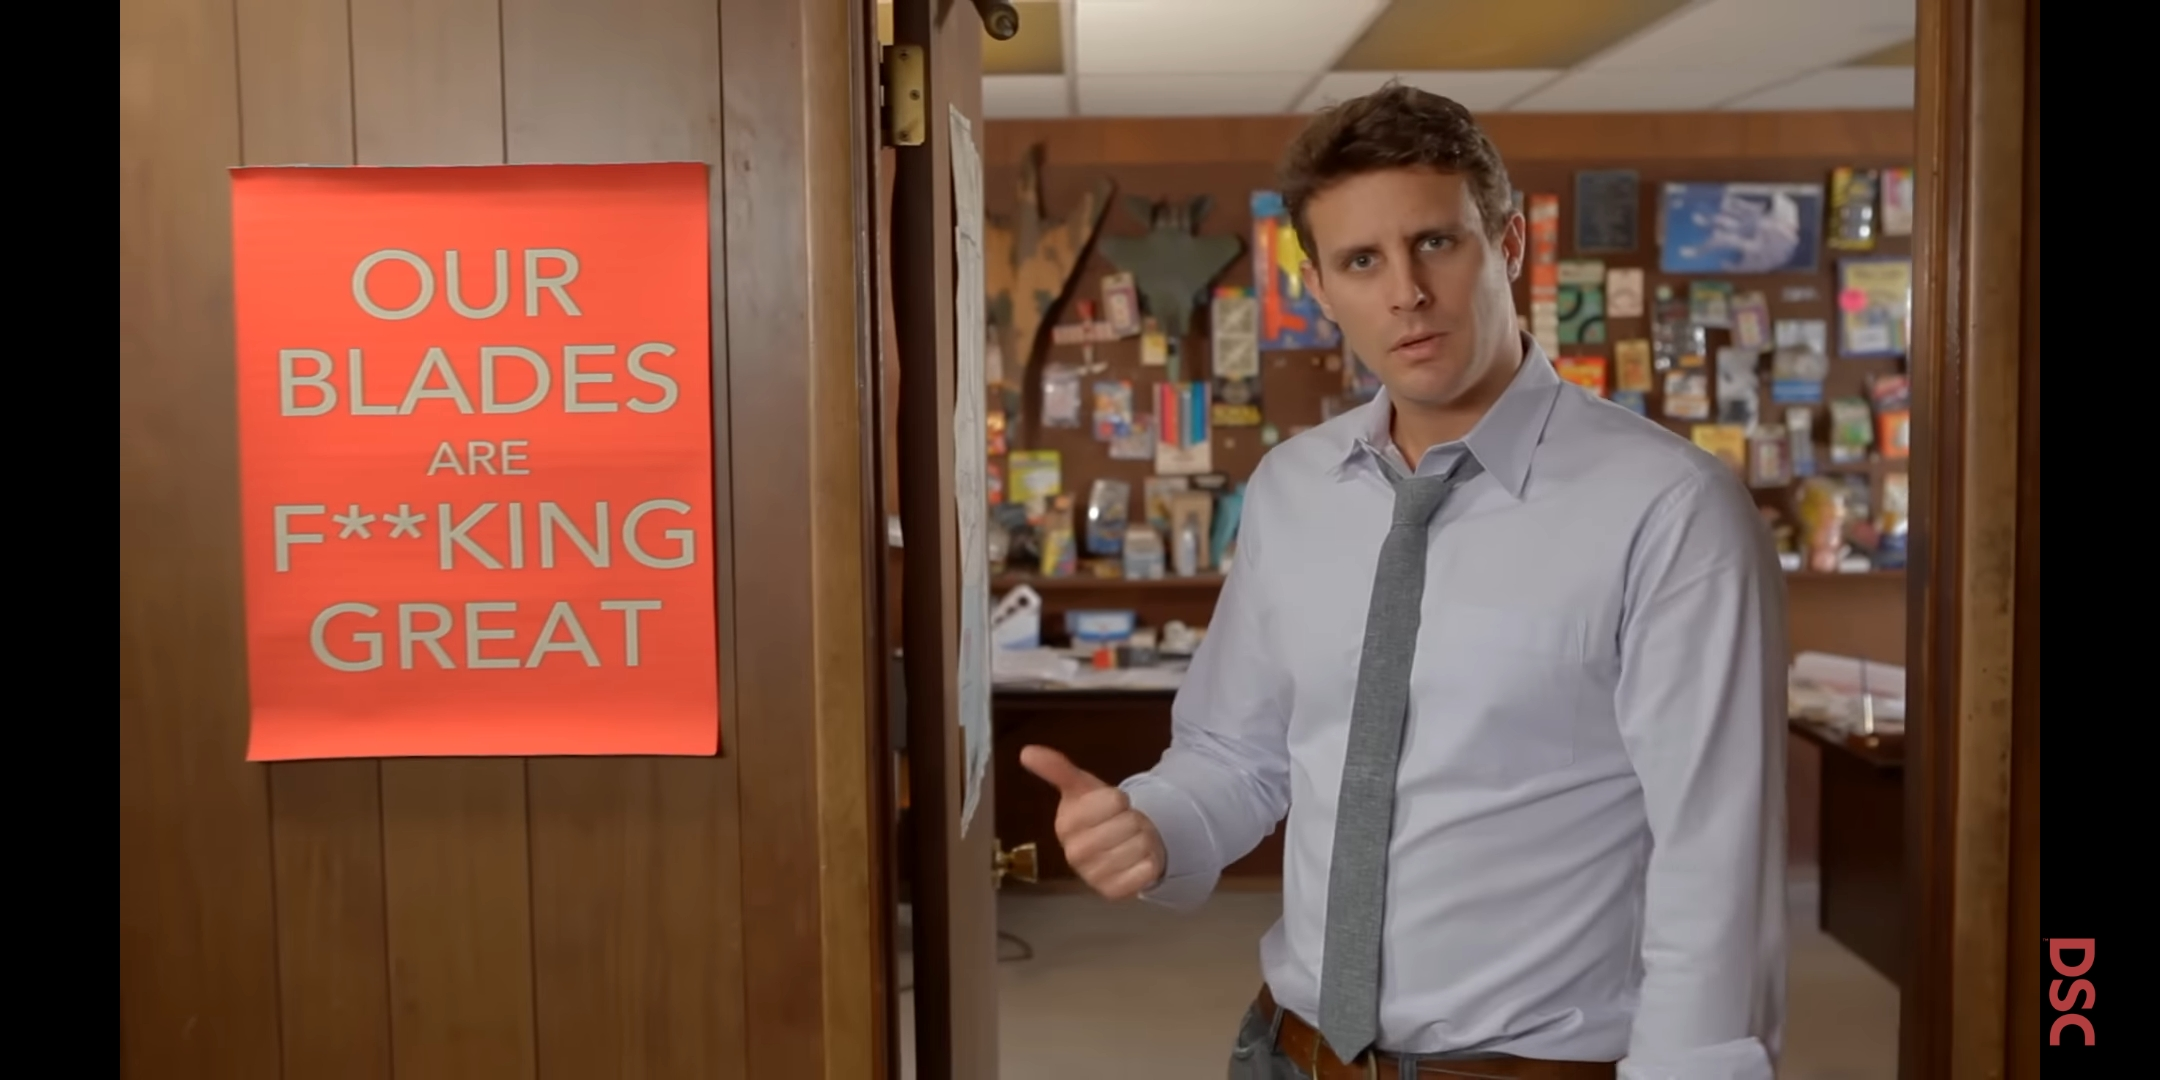 Founder of Dollar Shave Club Michael Dustin in the dollar shave club launch advertisement